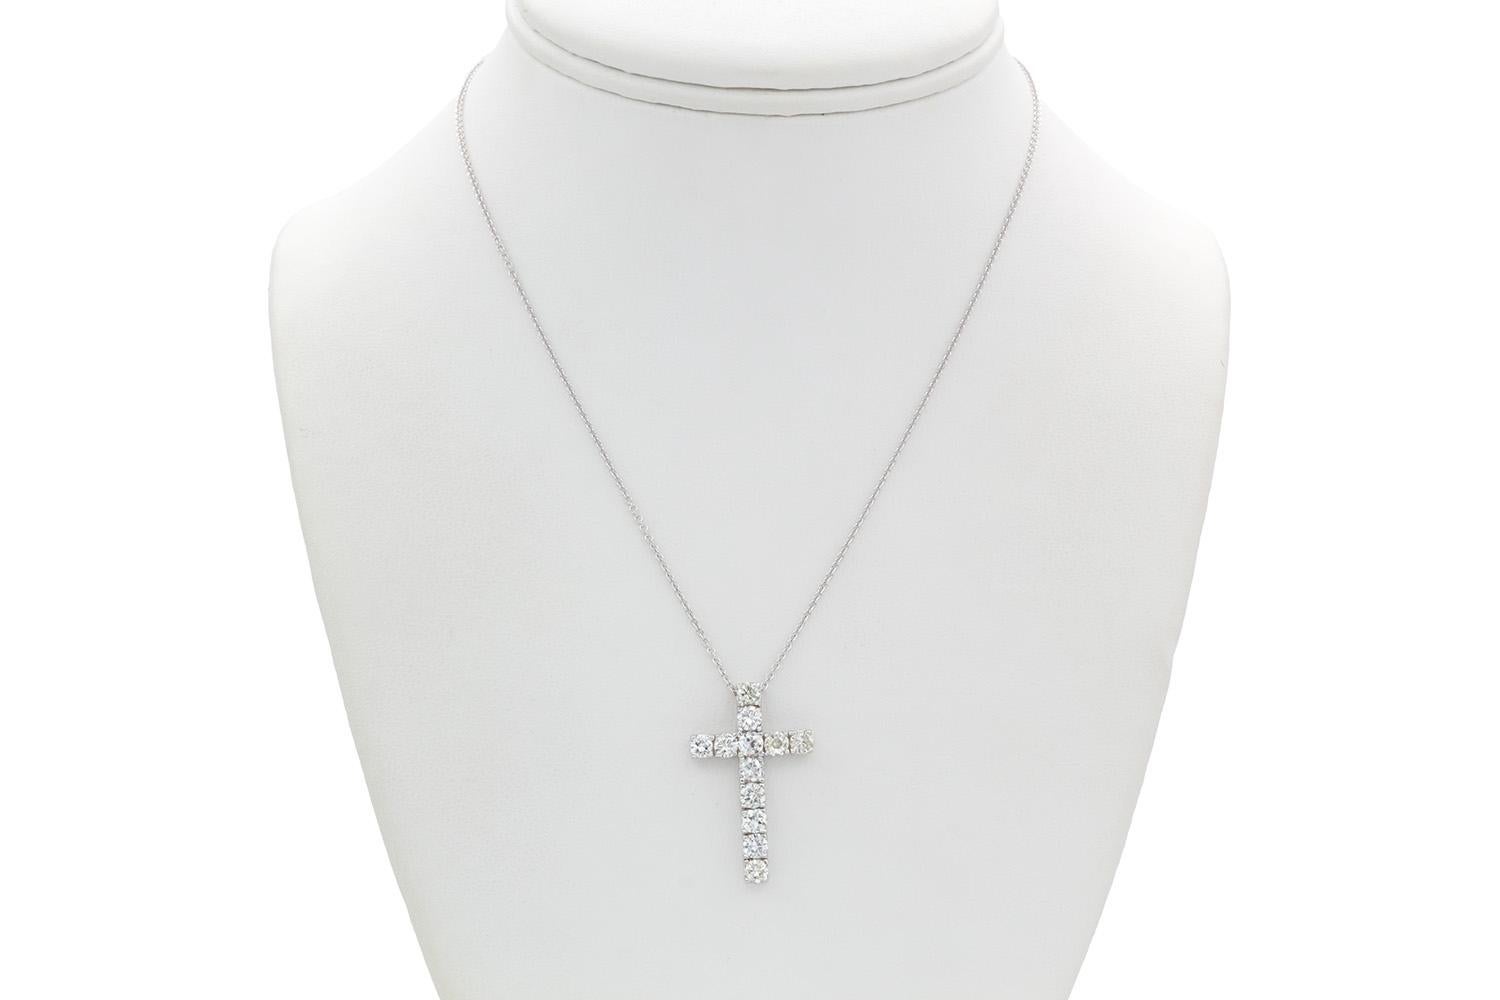 We are pleased to present this 14k White Gold & Diamond Cross Crucifix Pendant Necklace. This stunning piece features 2.00ctw H-J/VS2-SI1 round brilliant cut diamonds set in a 14k white gold cross pendant on a 14k white gold chain which is